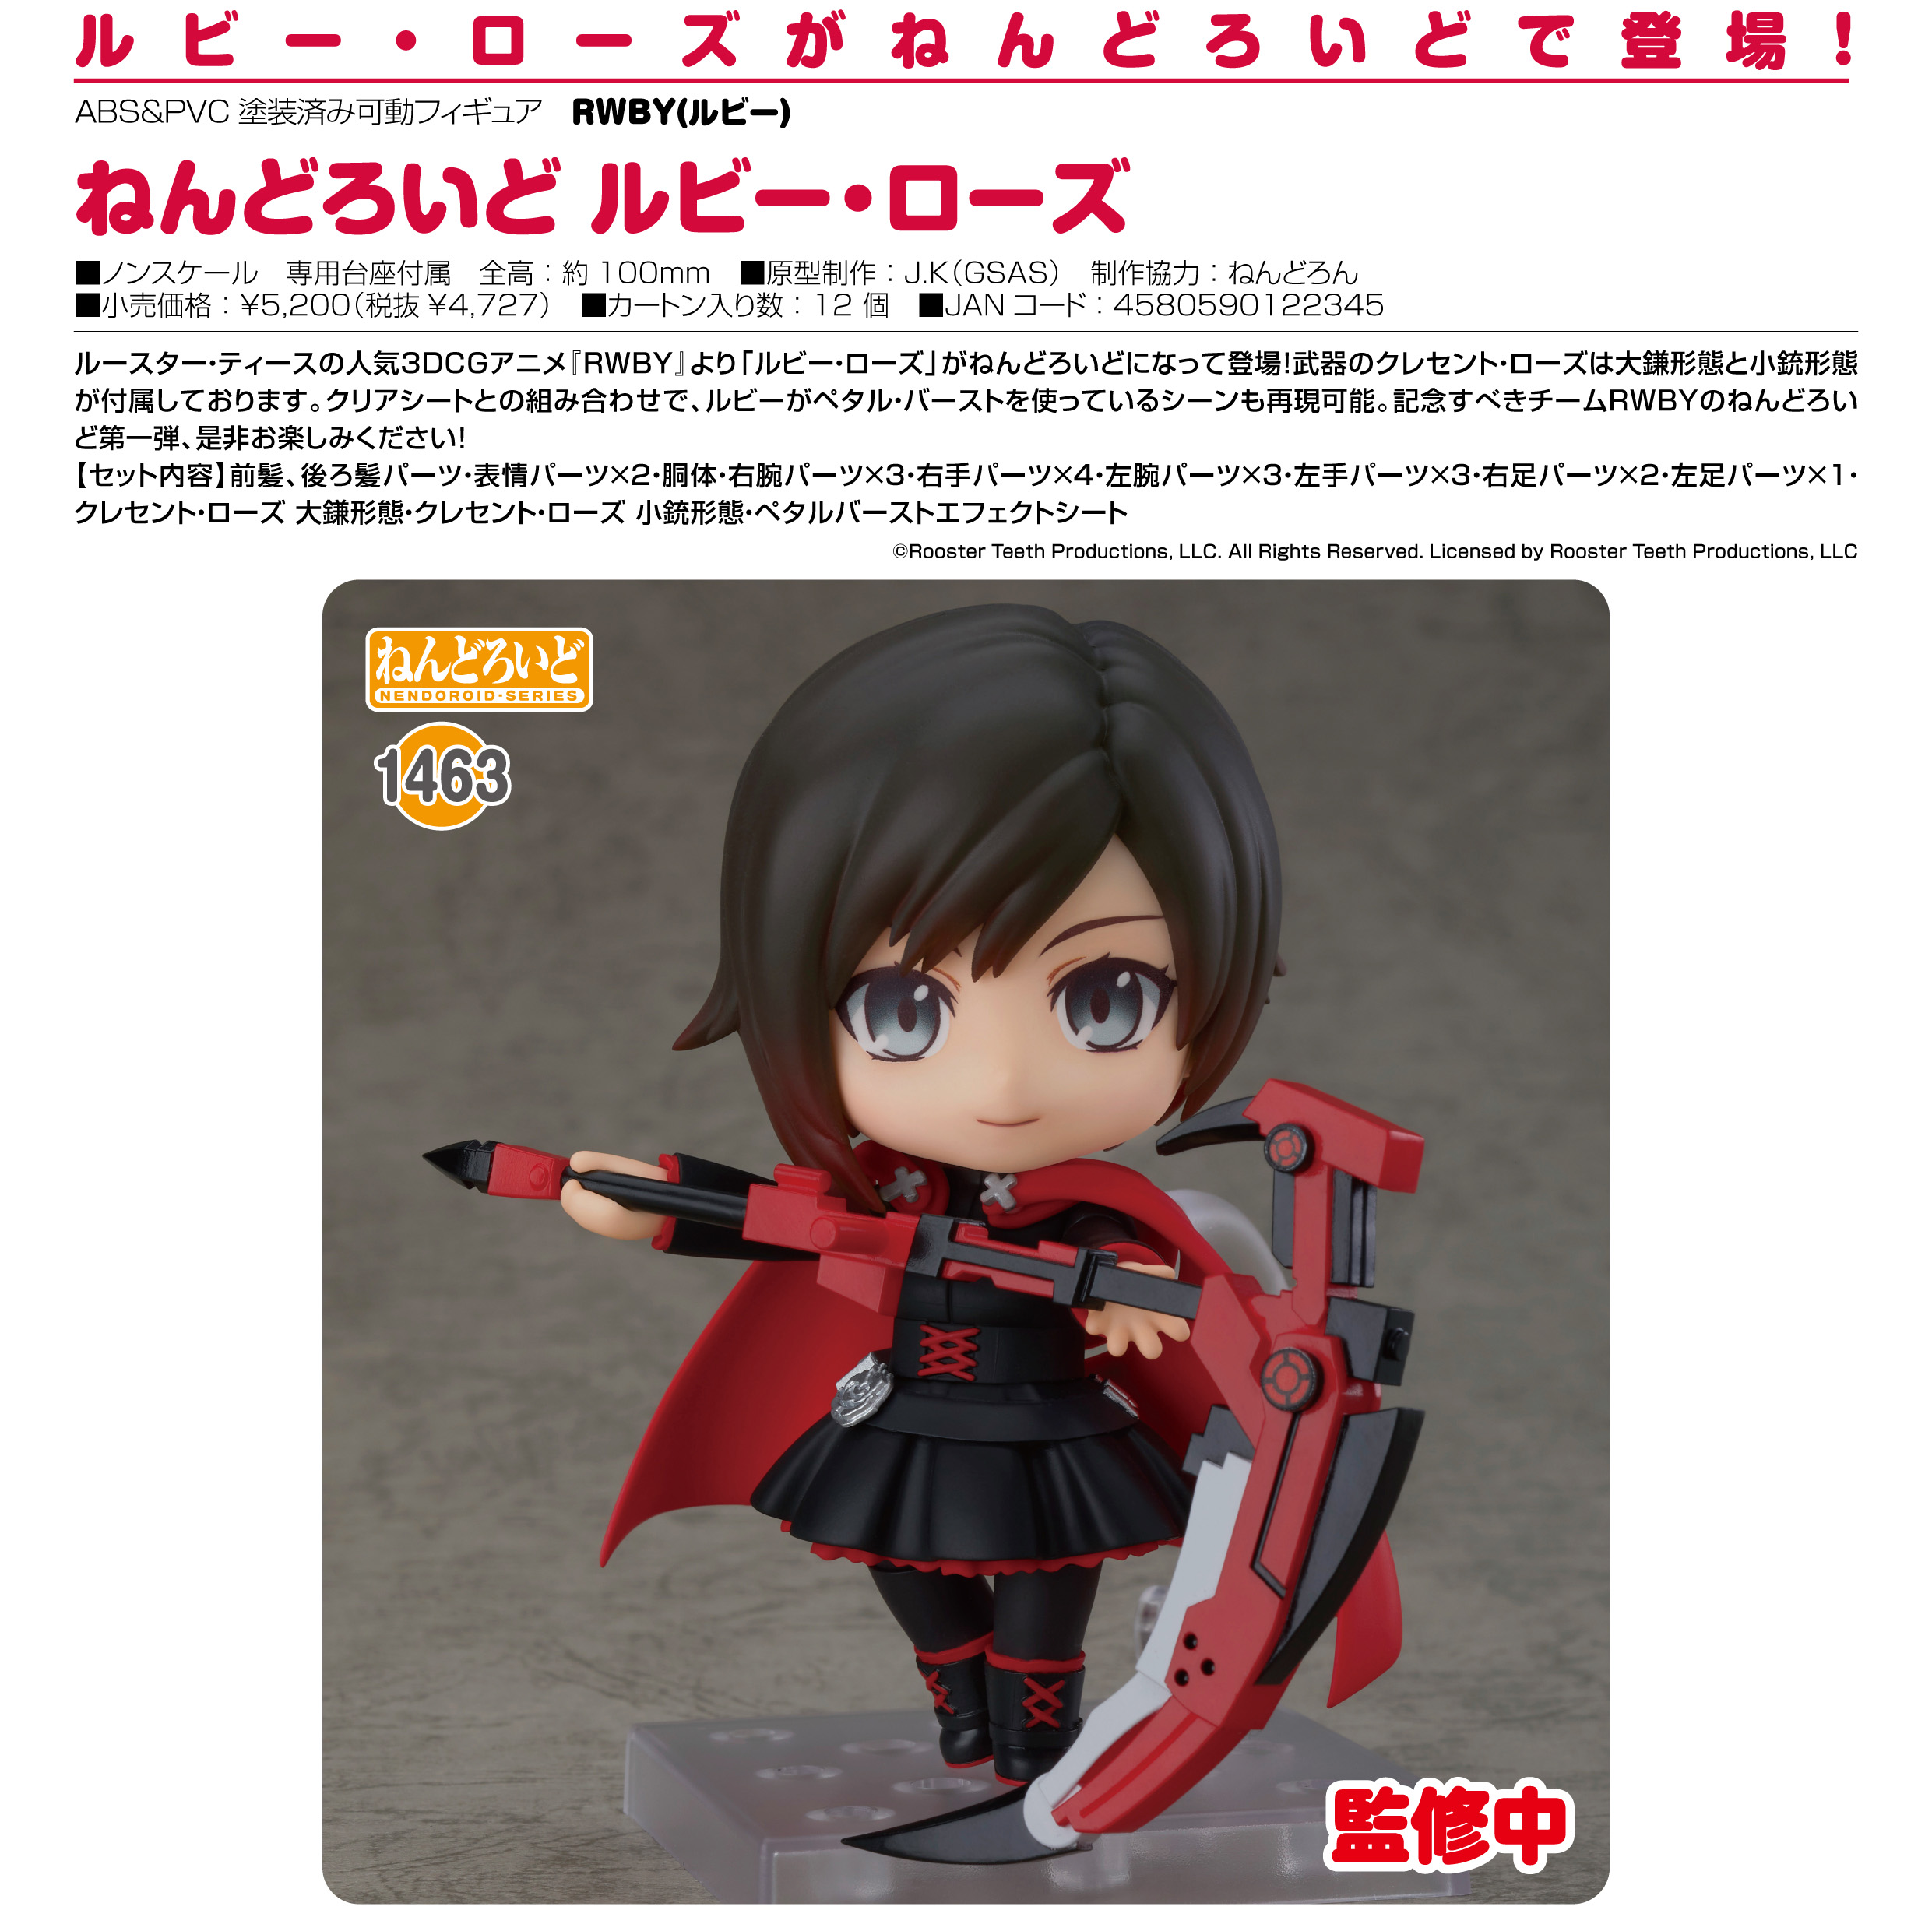 Nendoroid Rwby Ruby Rose Aus Anime Collectables Anime And Game Figures